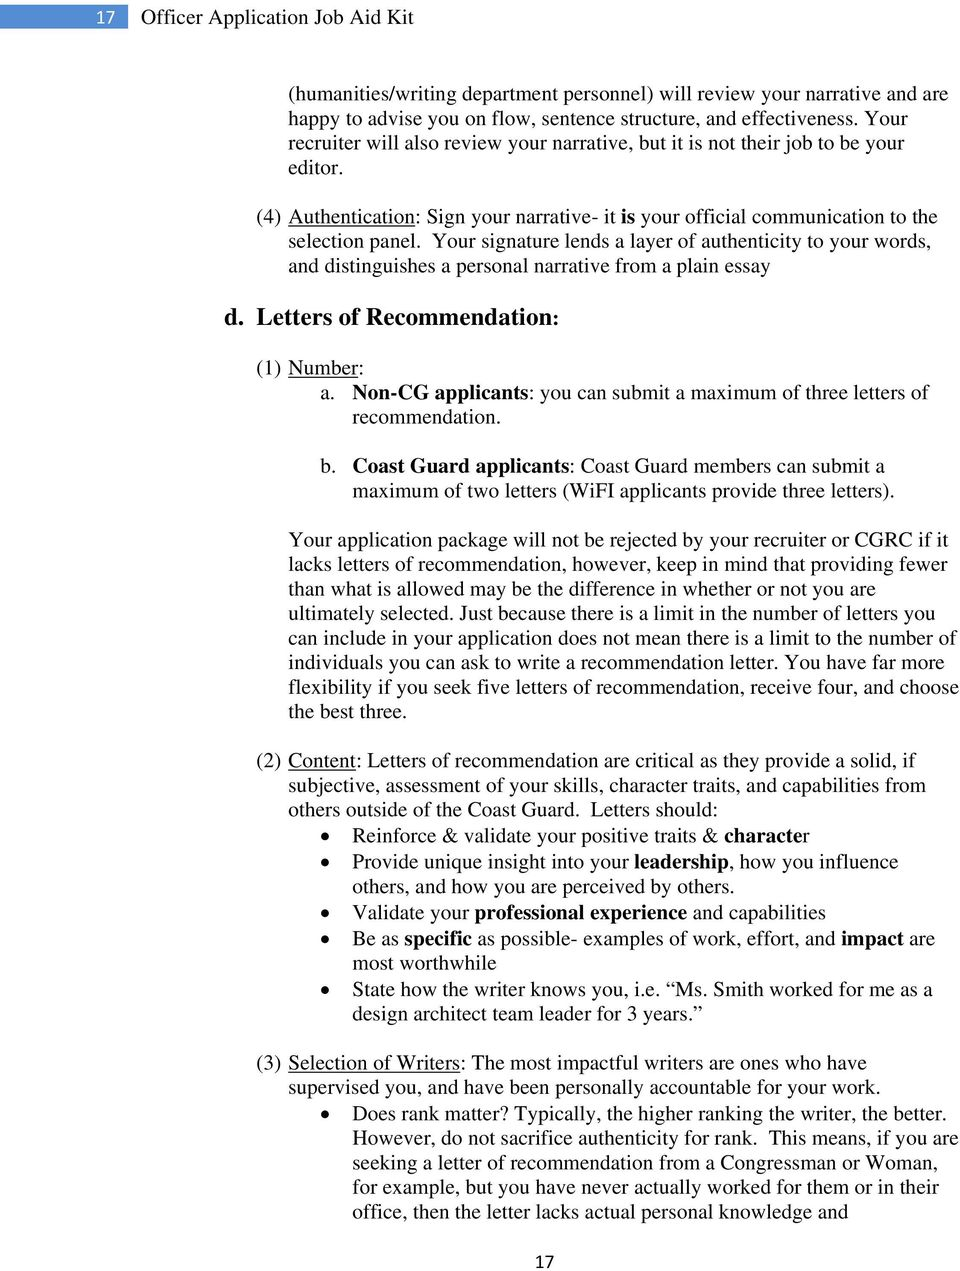 Coast Guard Academy Letter Of Recommendation Debandje throughout dimensions 960 X 1271